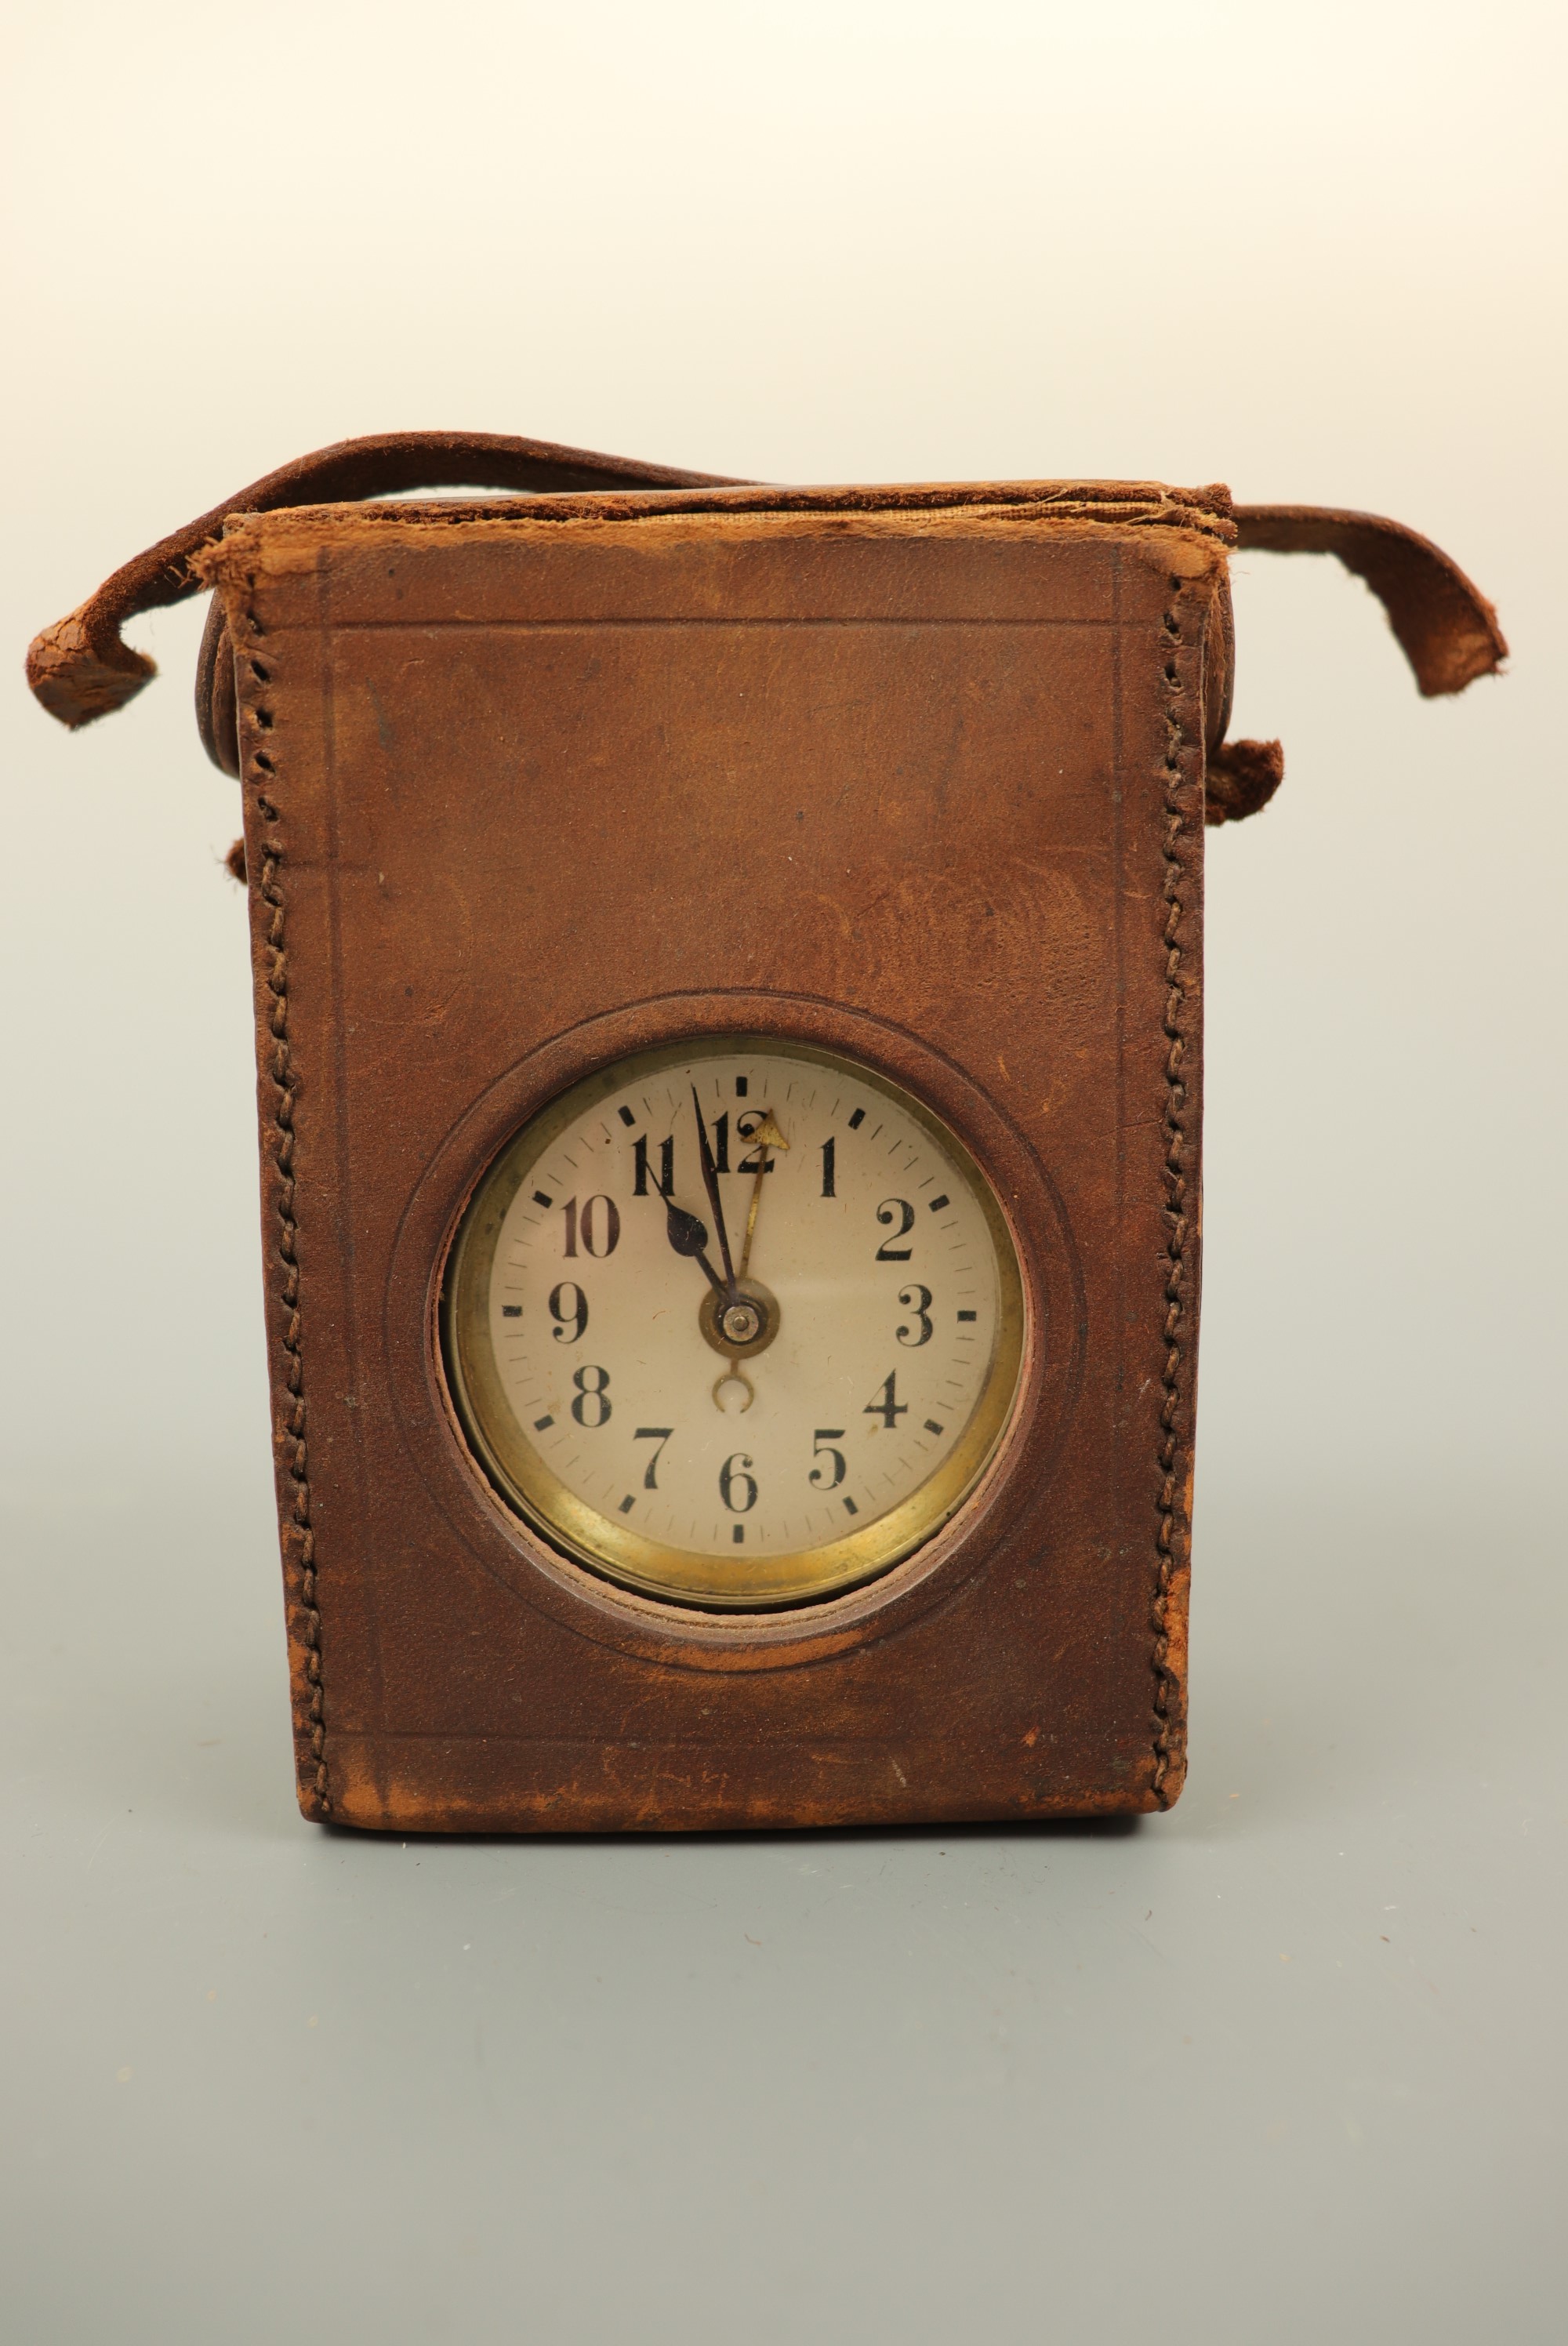 An early 20th Century bedside travel alarm clock, with silvered dial and Arabic numerals, in a